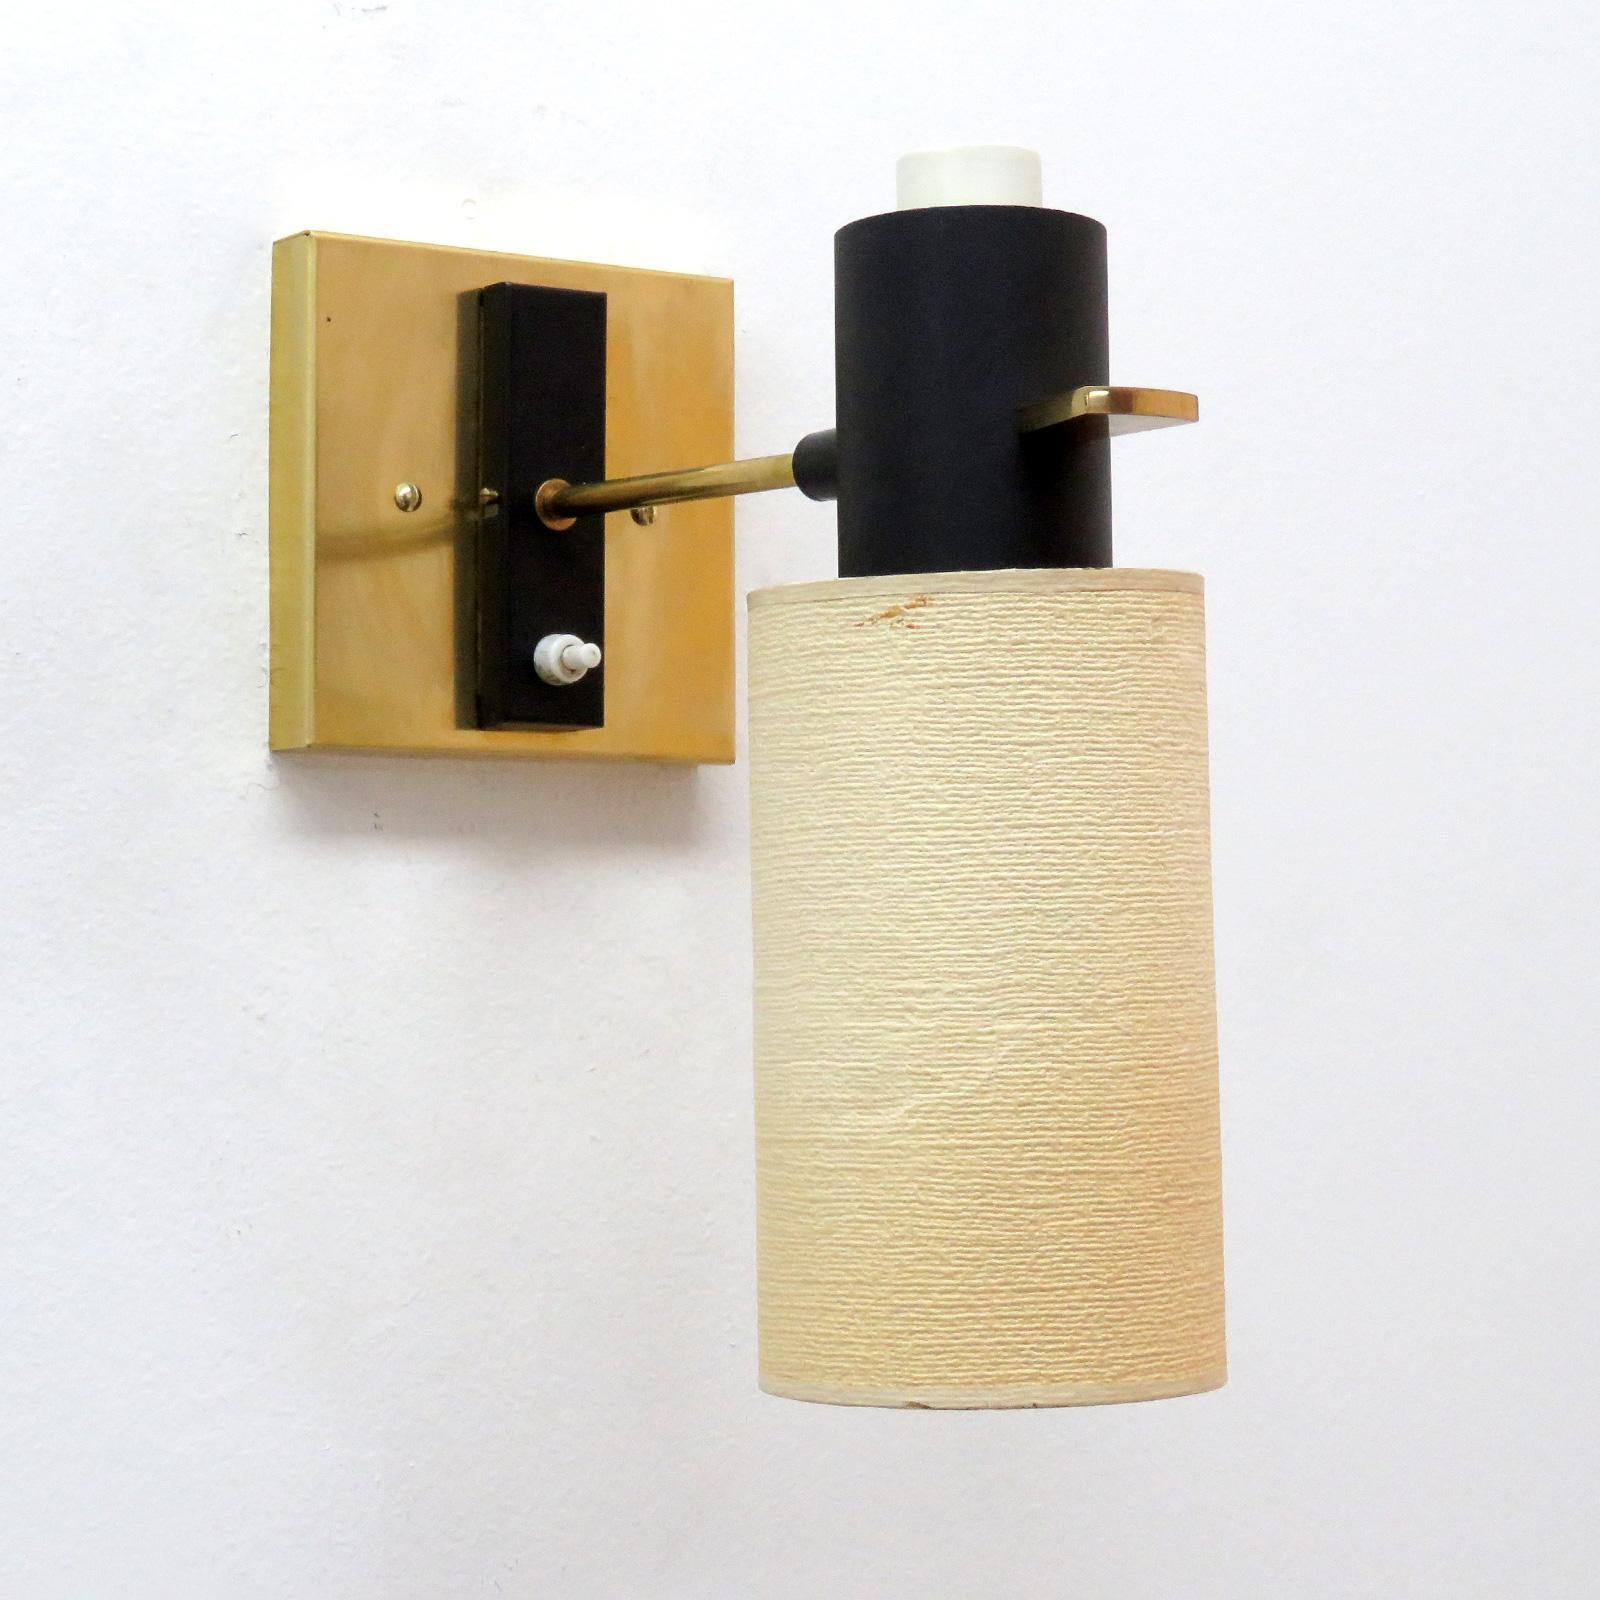 Elegant pair of French articulate wall lights brass by Boris Lacroix with original paper shades on a black enameled body with brass detailing, a signature brass handle to adjust the sconces and on/off switch on the original black back plate, custom